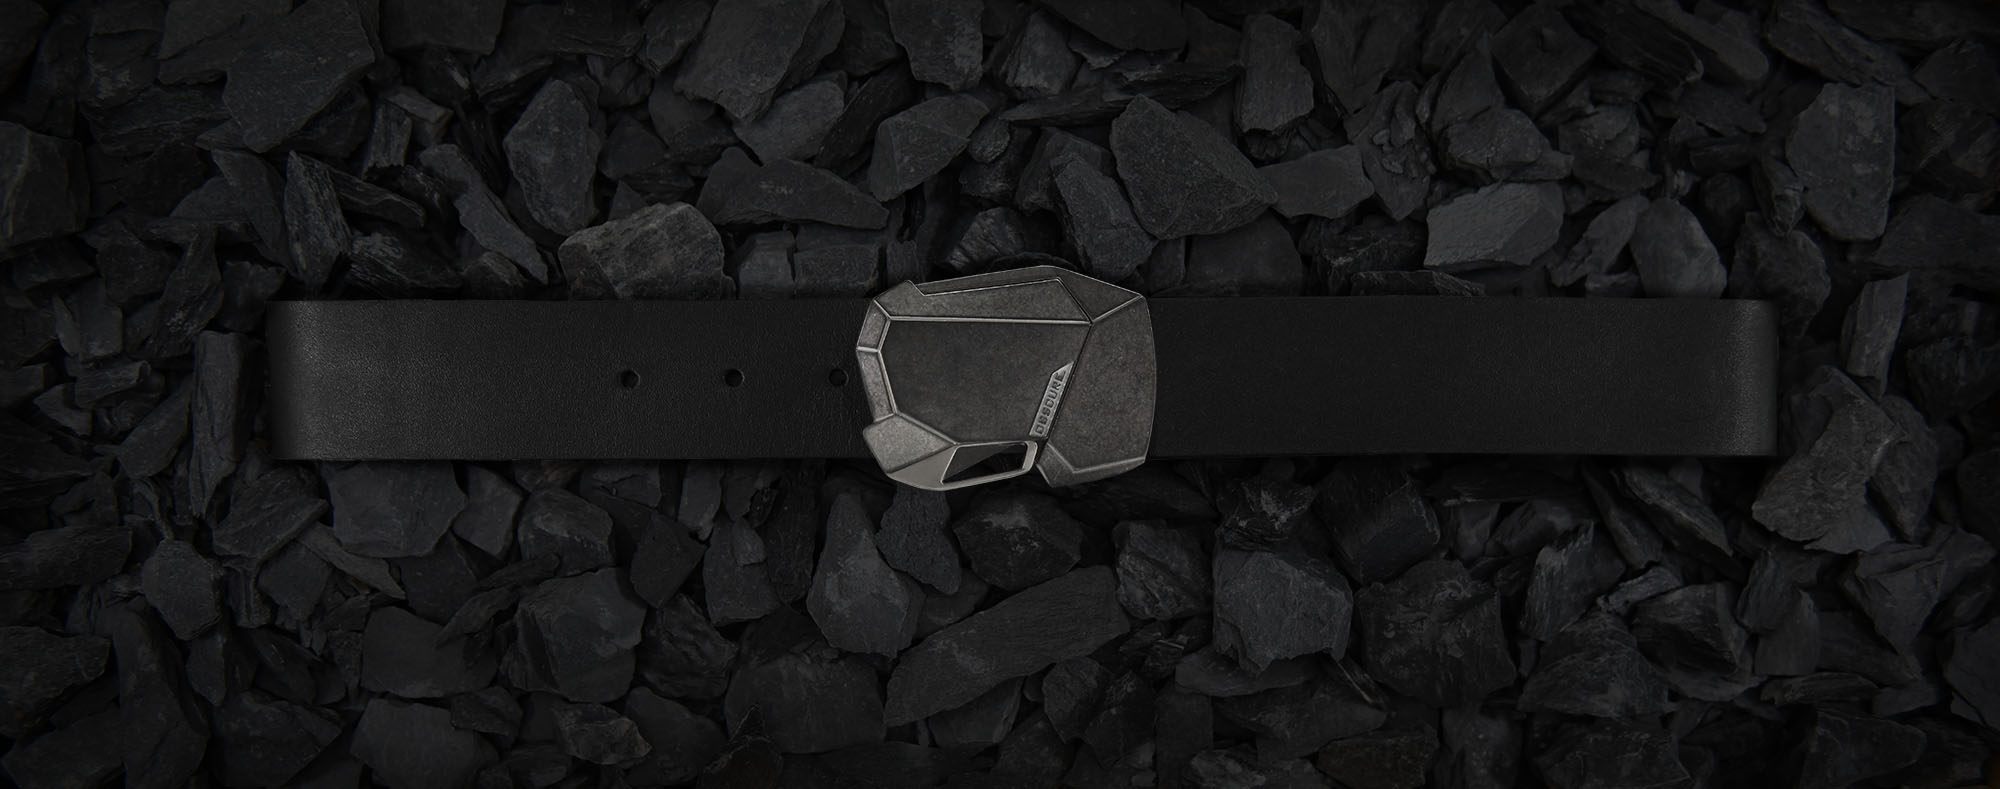 Top belts for men that must get a space in every man's wardrobe